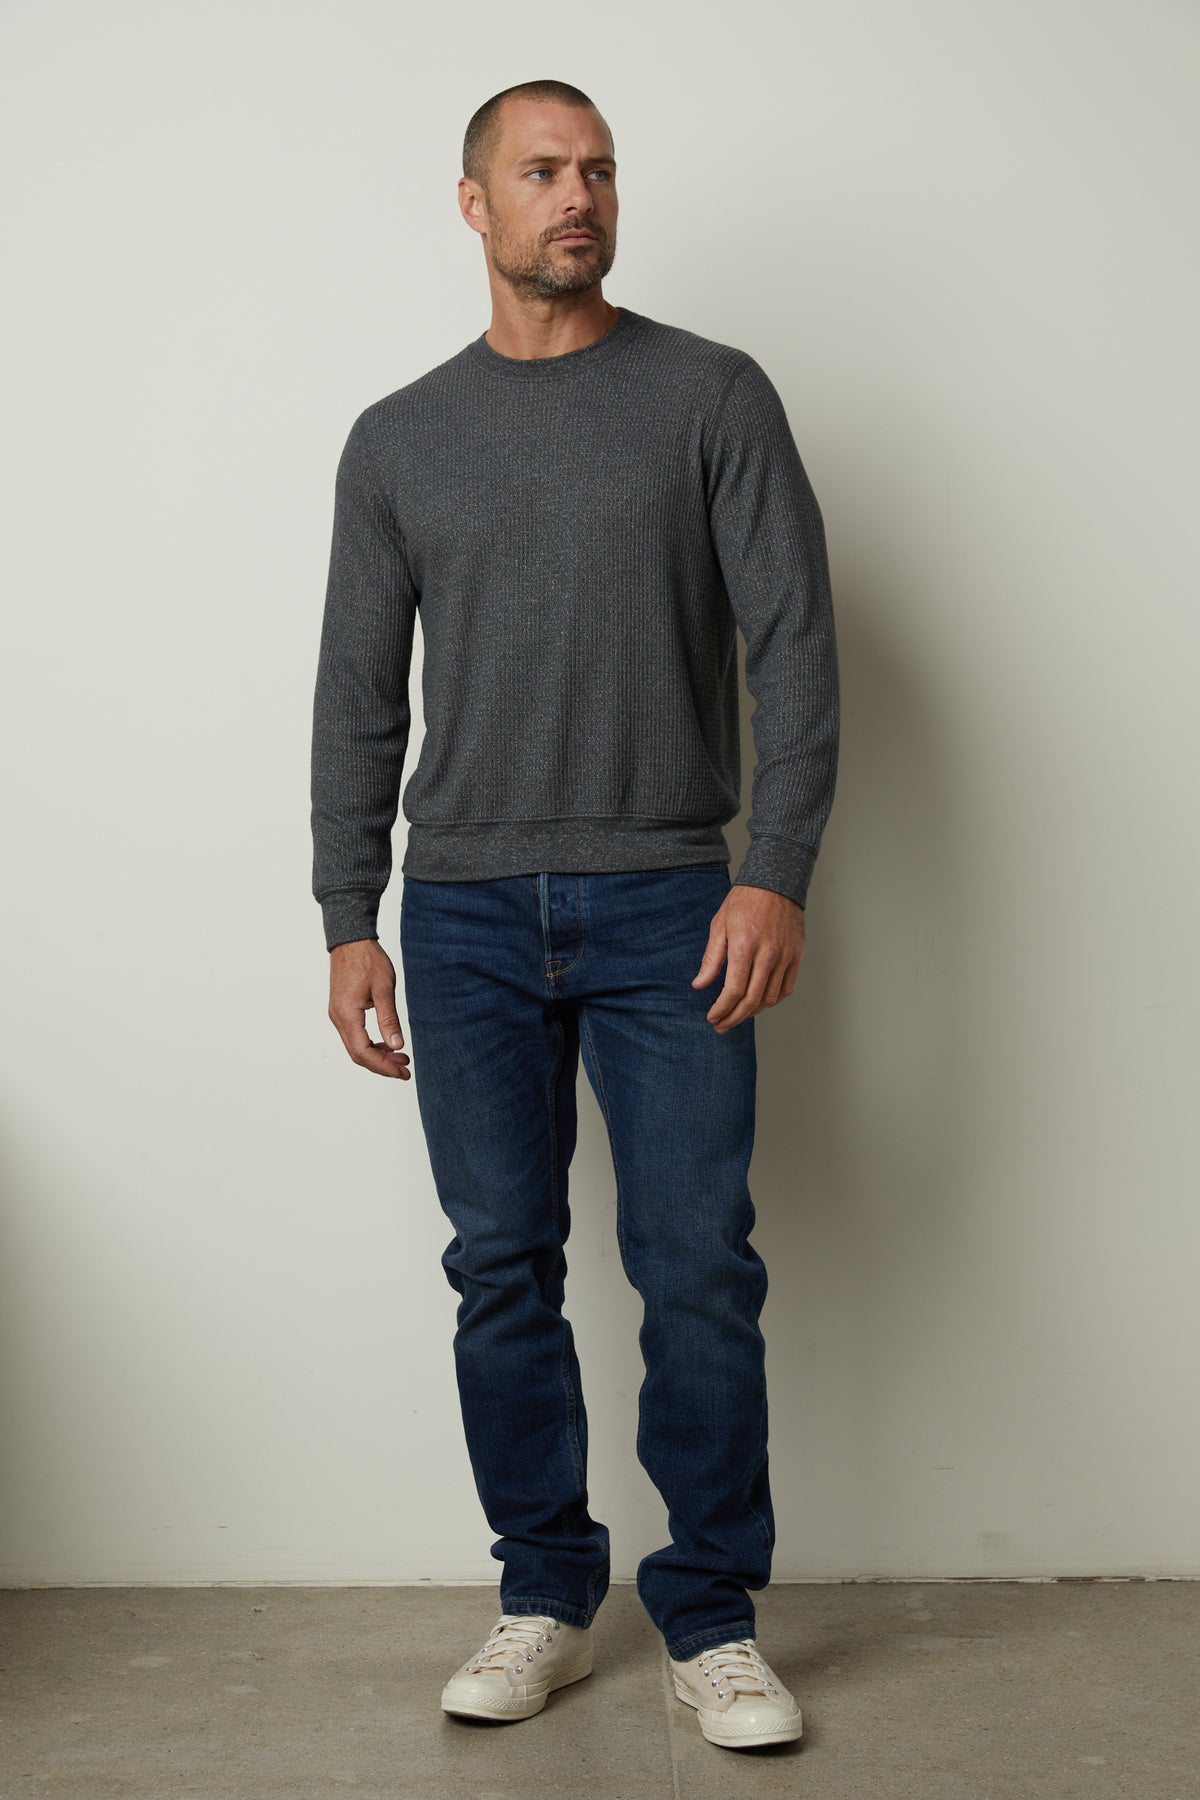 A man wearing jeans and a sweater in the PONCHO THERMAL CREW style by Velvet by Graham & Spencer standing in front of a wall.-35547551498433